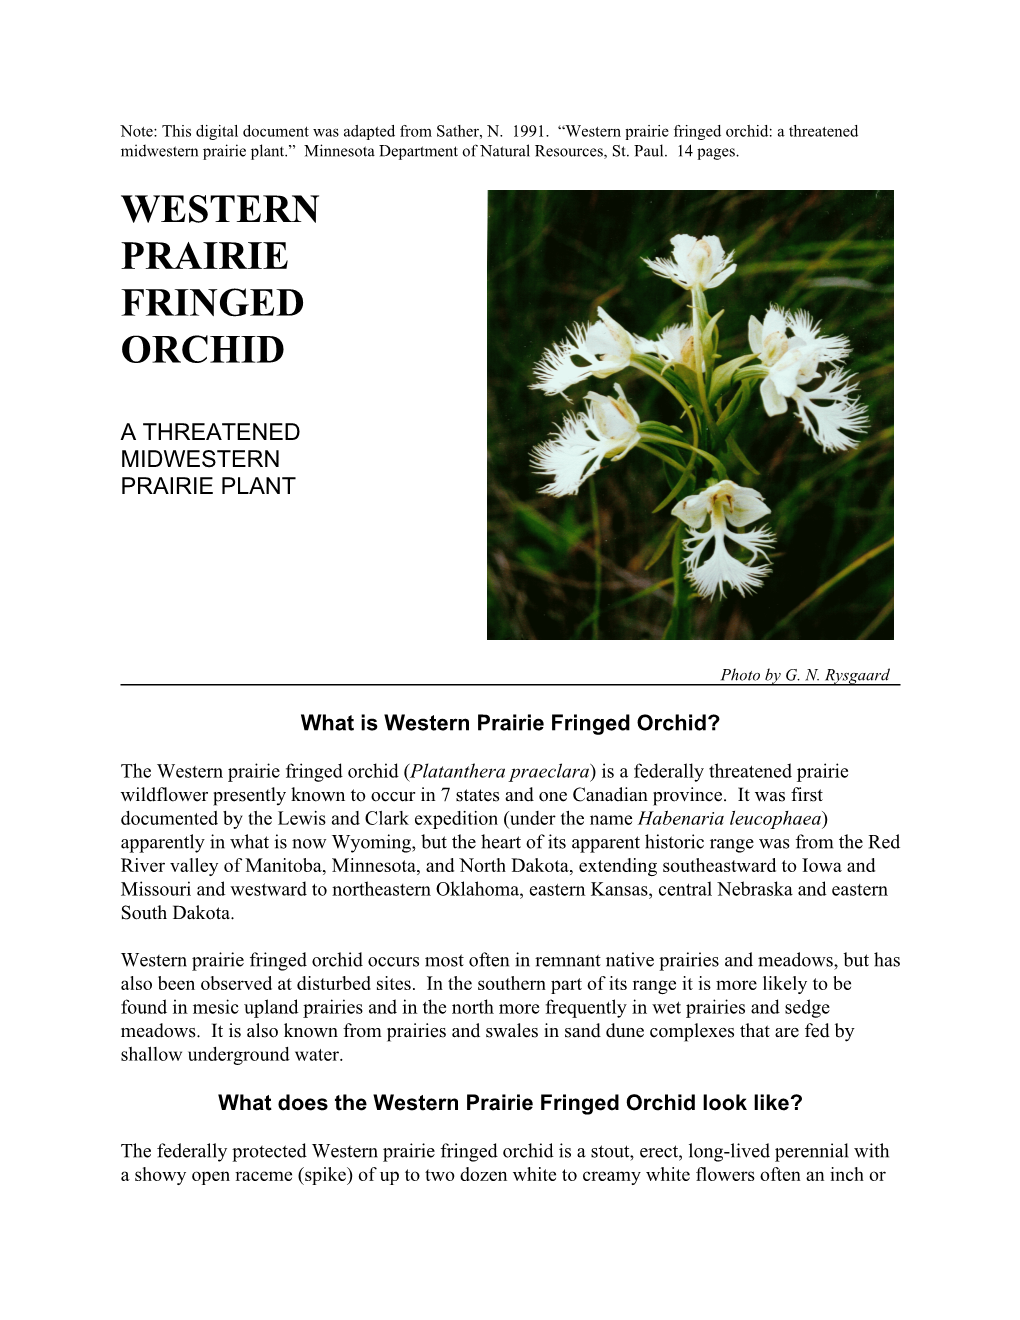 Western Prairie Fringed Orchid: a Threatened Midwestern Prairie Plant.” Minnesota Department of Natural Resources, St